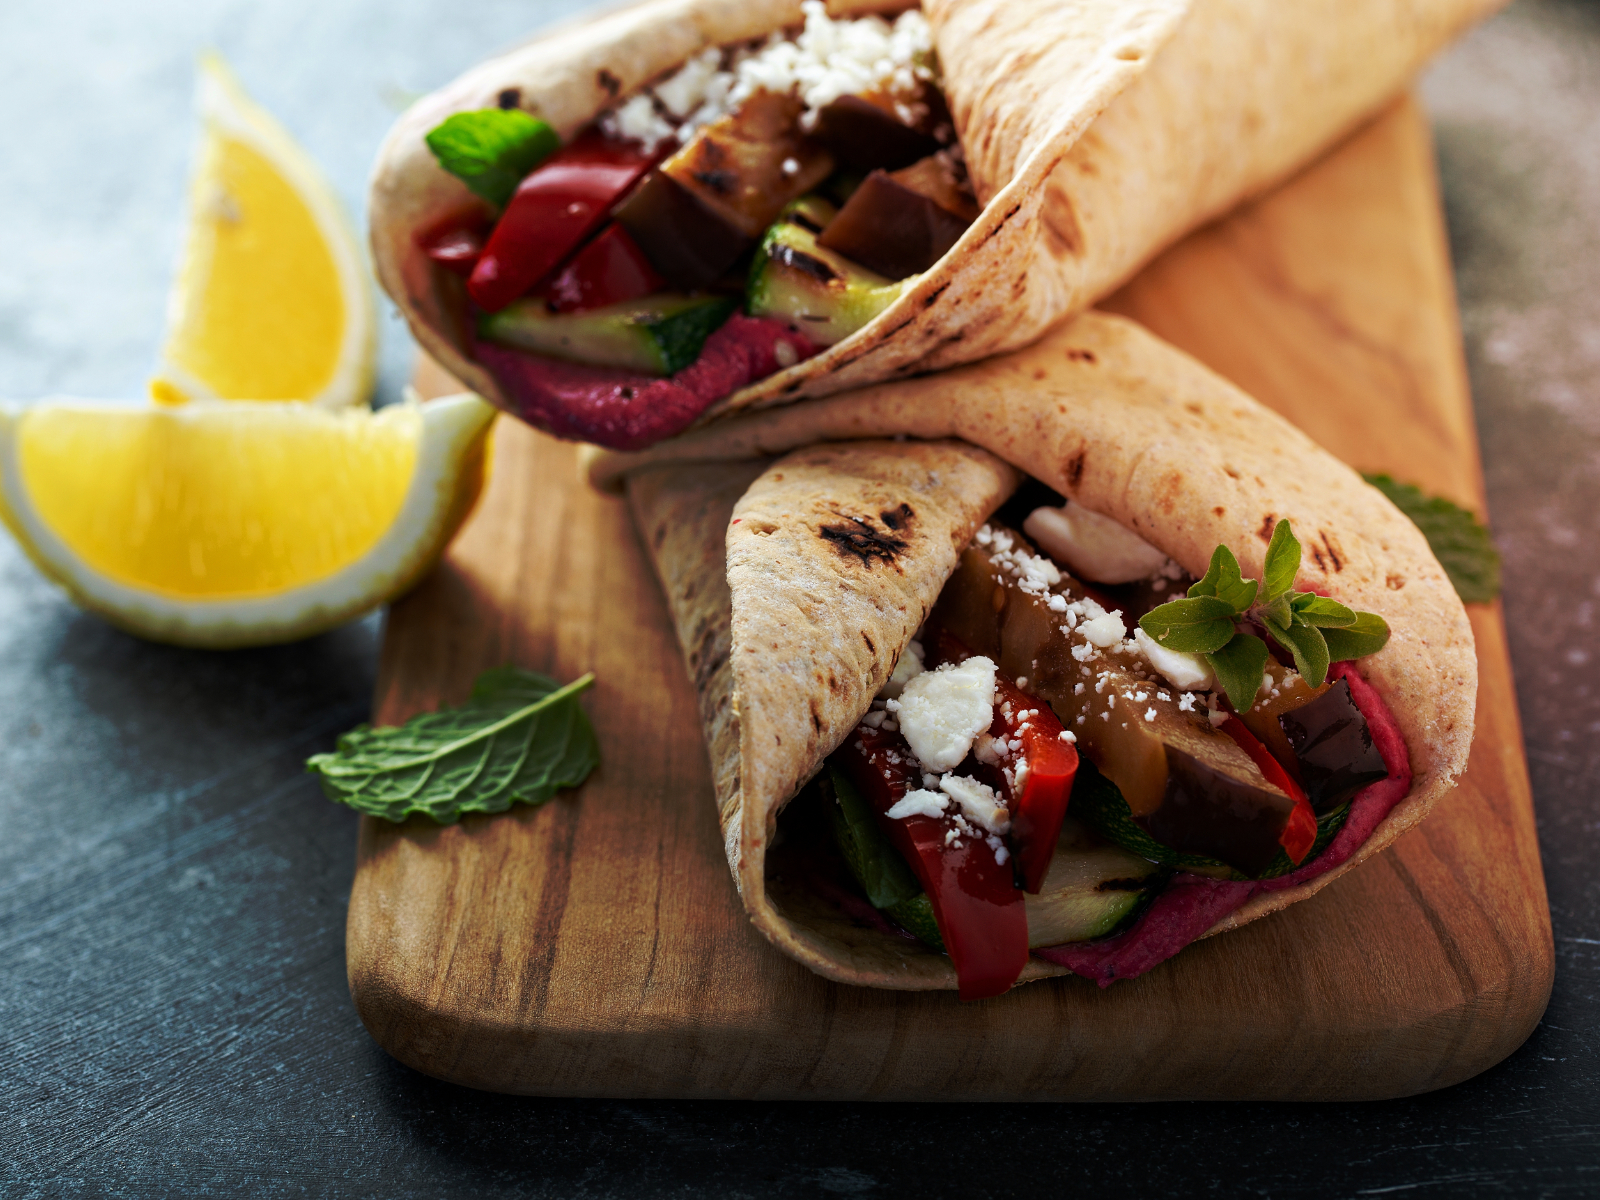 Whole grain wrap with hummus, grilled vegetables, and feta cheese